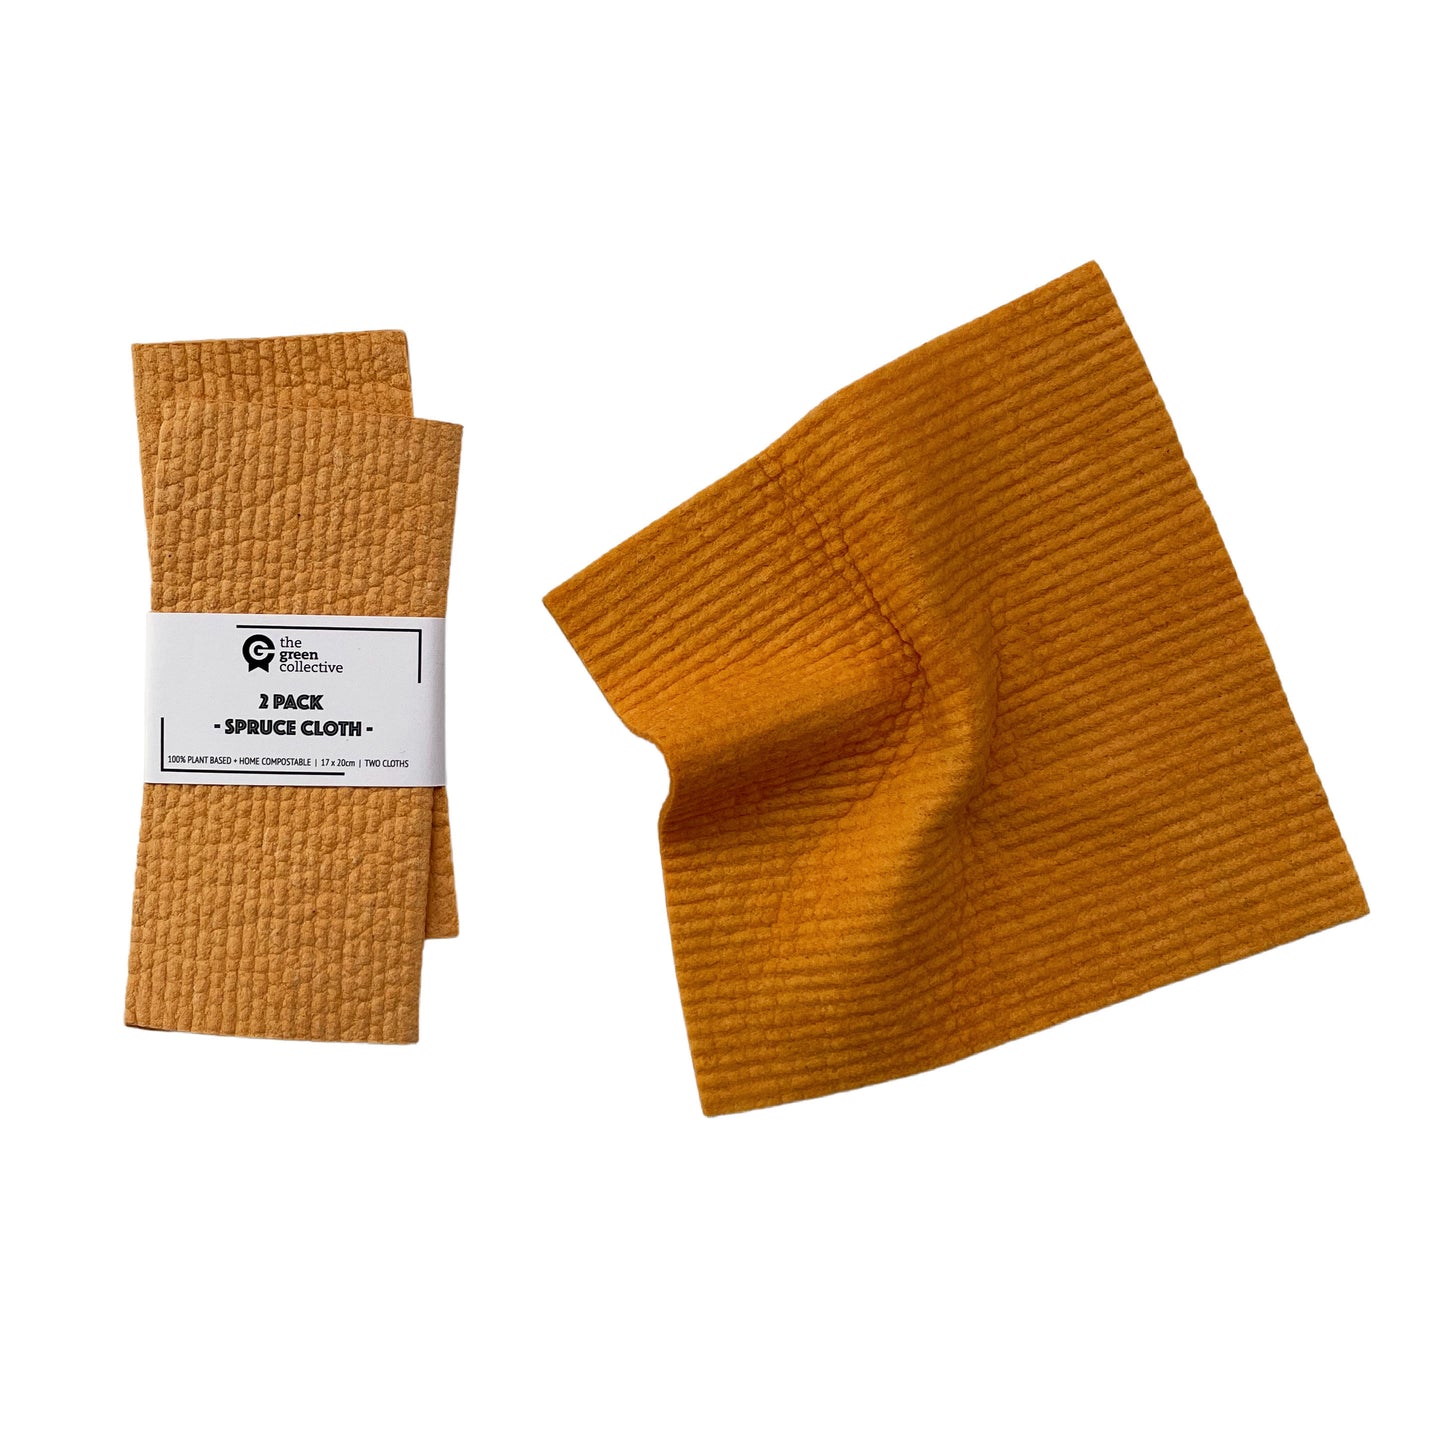 Mustard Solid Colour SPRUCE - Set of 2 Dishcloths